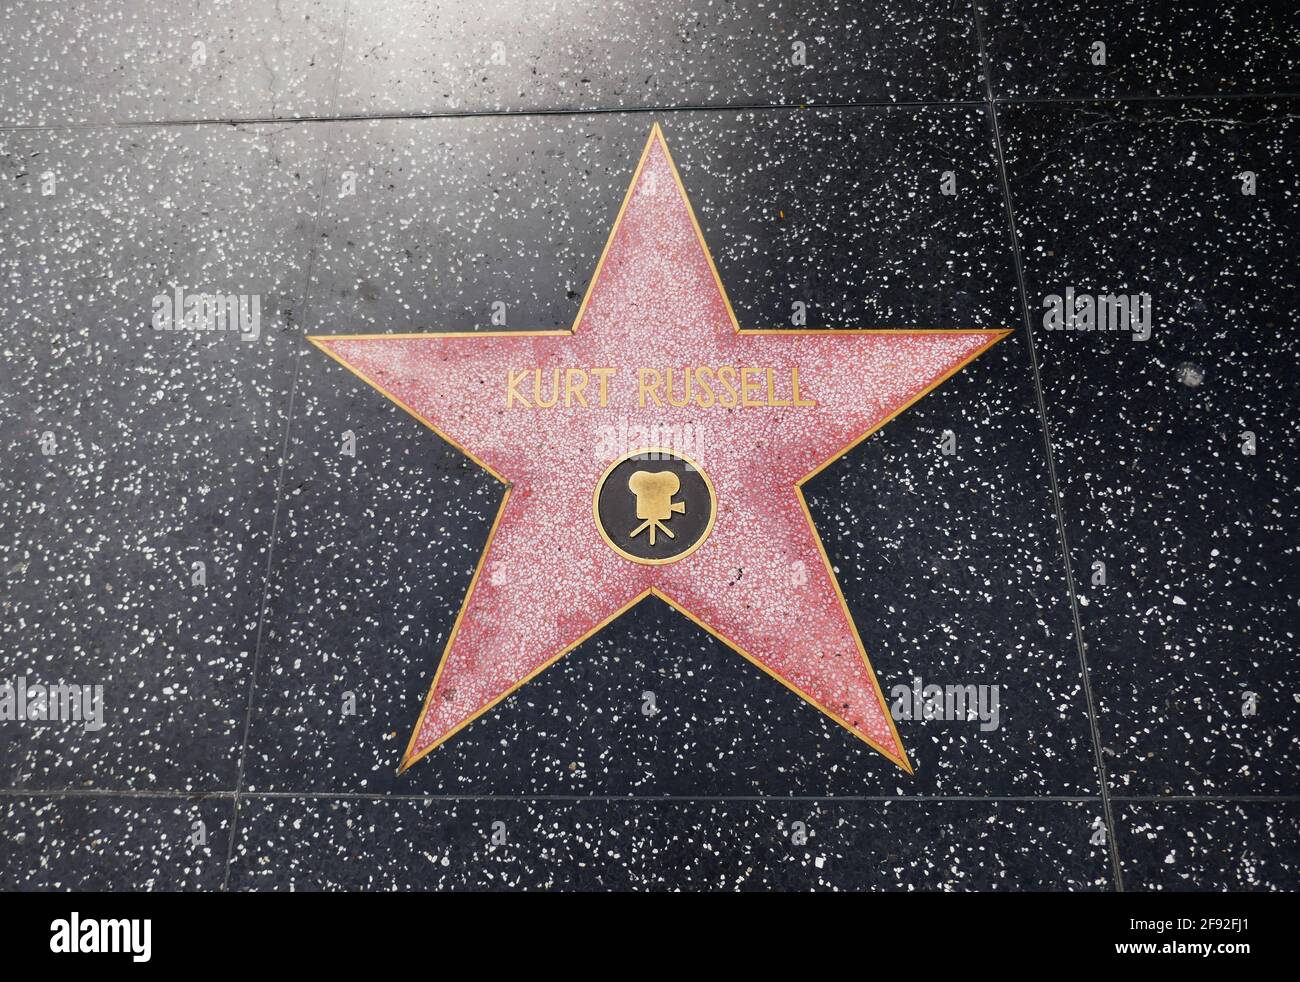 Hollywood, California, USA 14th April 2021 A general view of atmosphere of actor Kurt Russell's Star on the Hollywood Walk of Fame on April 14, 2021 in Hollywood, California, USA. Photo by Barry King/Alamy Stock Photo Stock Photo